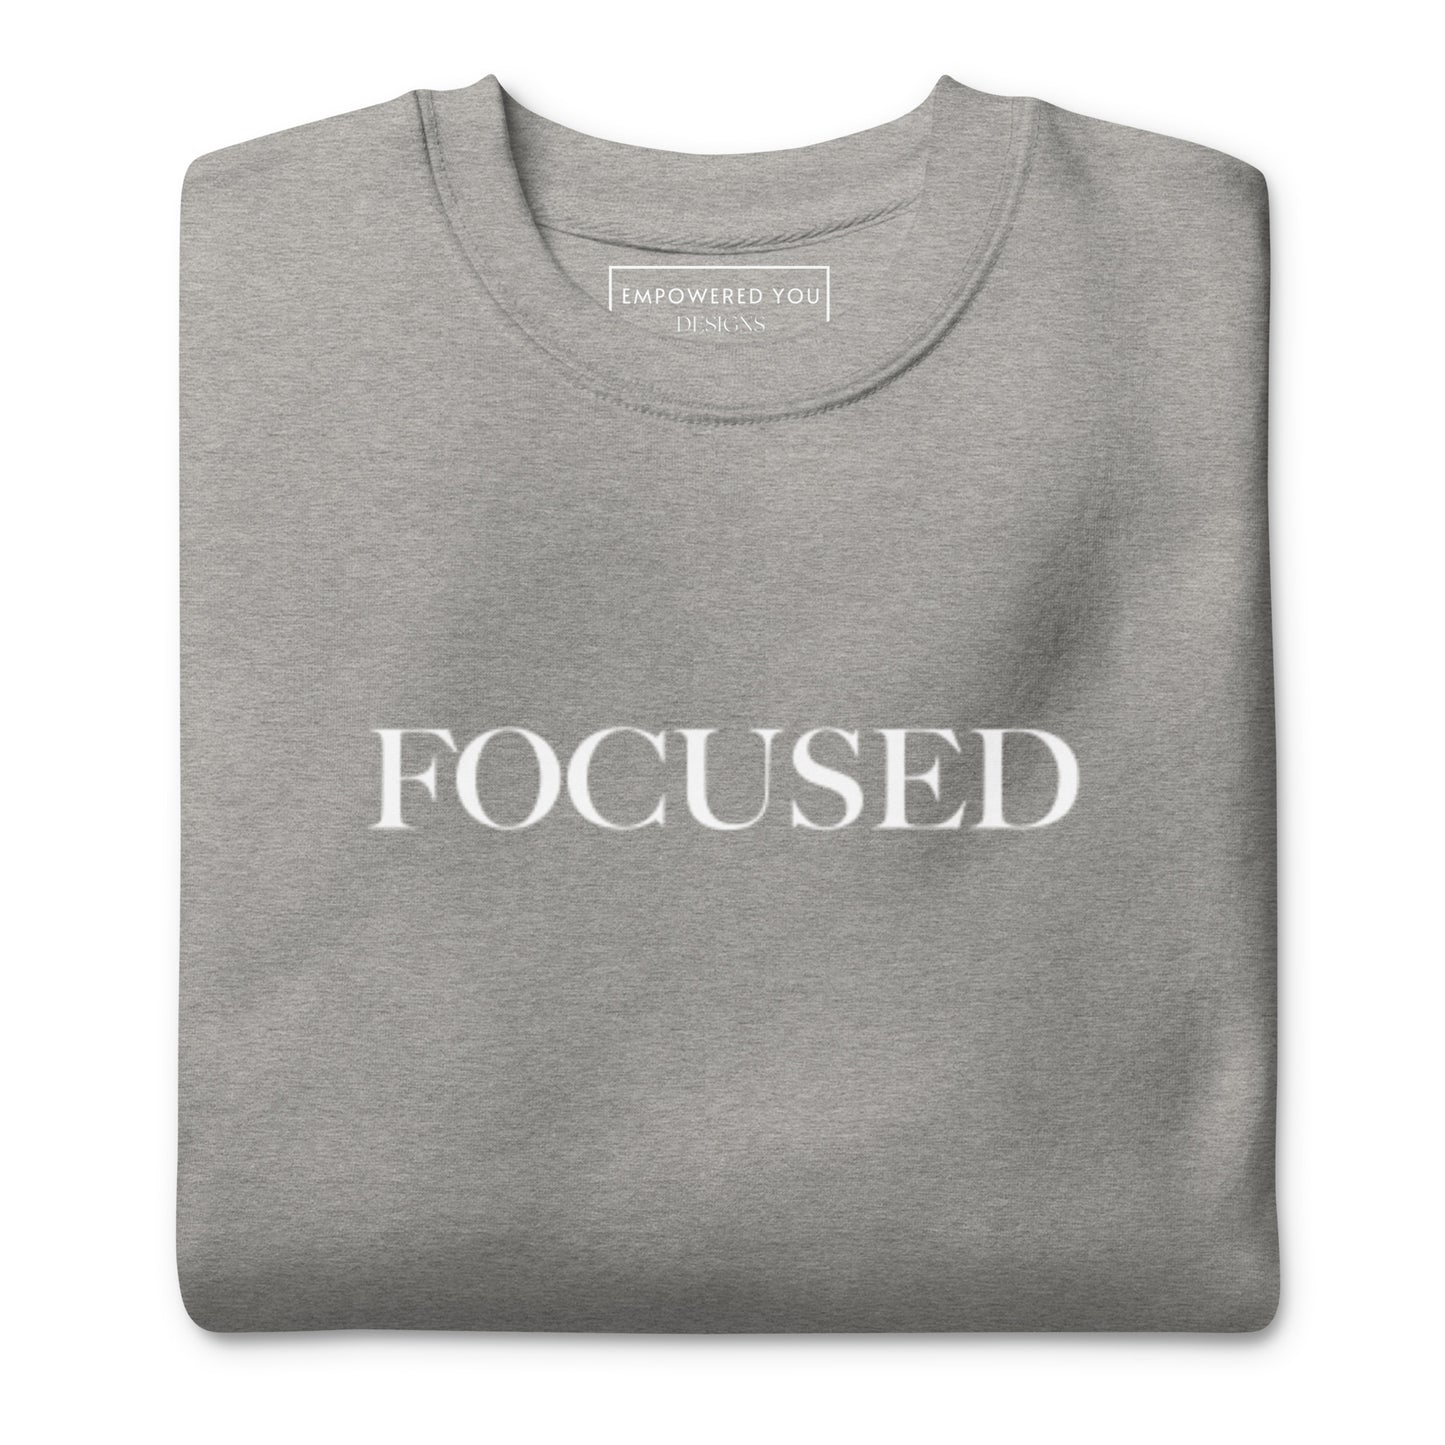 "FOCUSED" in white text (Front) & "Be the energy you want to attract" in white text (Back) - Premium Sweatshirt